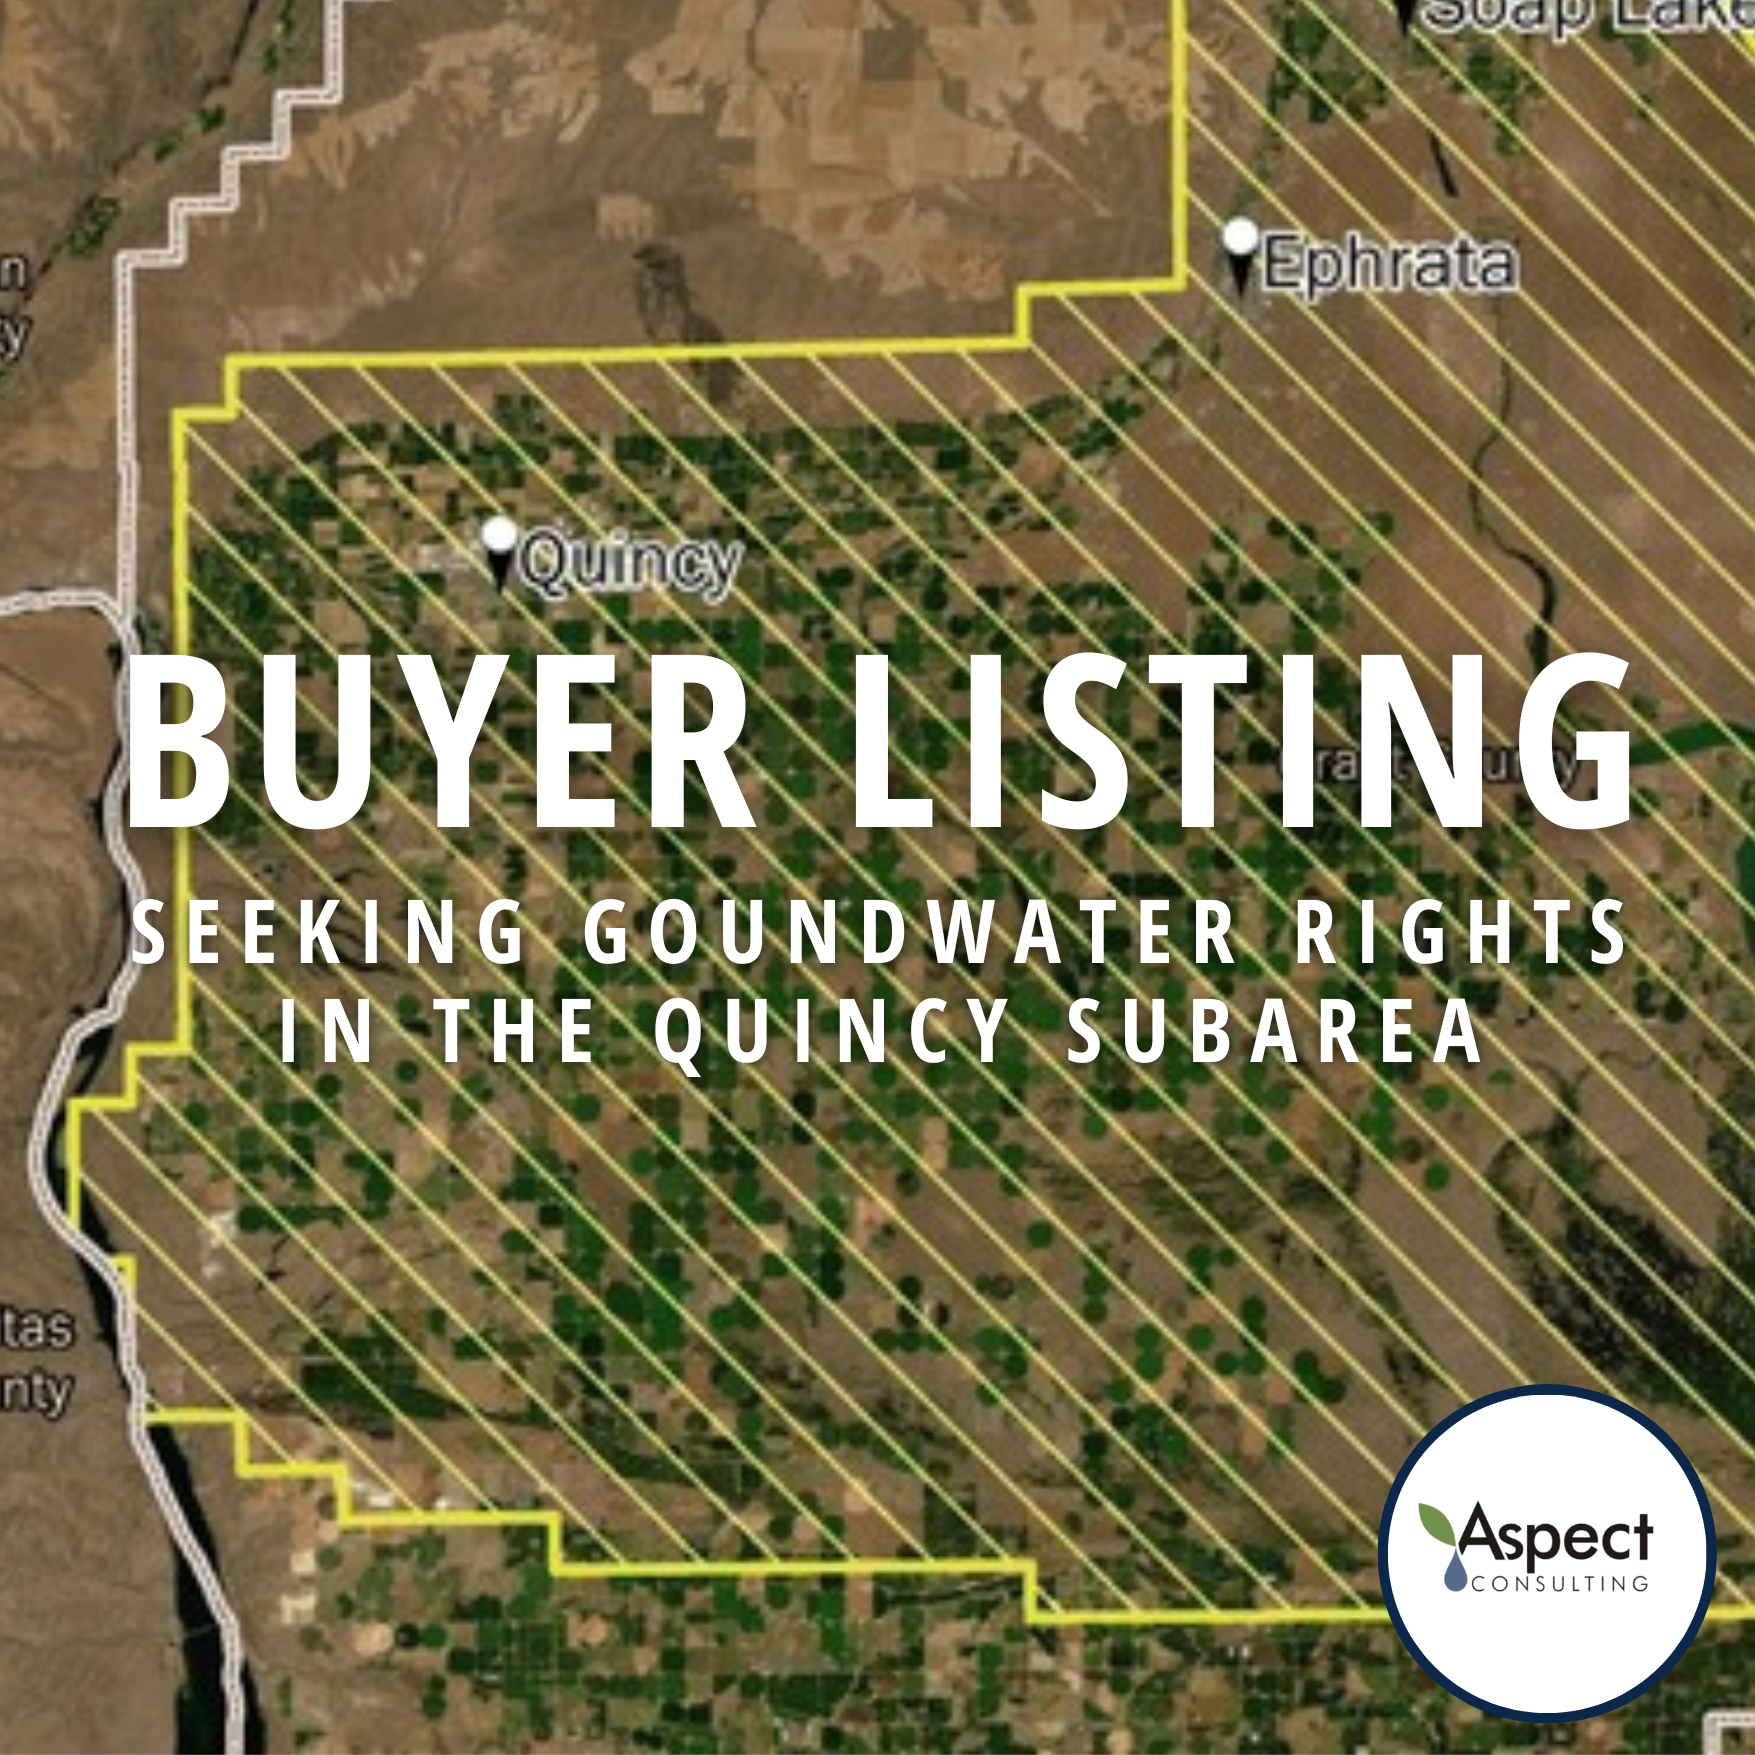 Seeking Groundwater Rights in the Quincy Subarea - Aspect Consulting